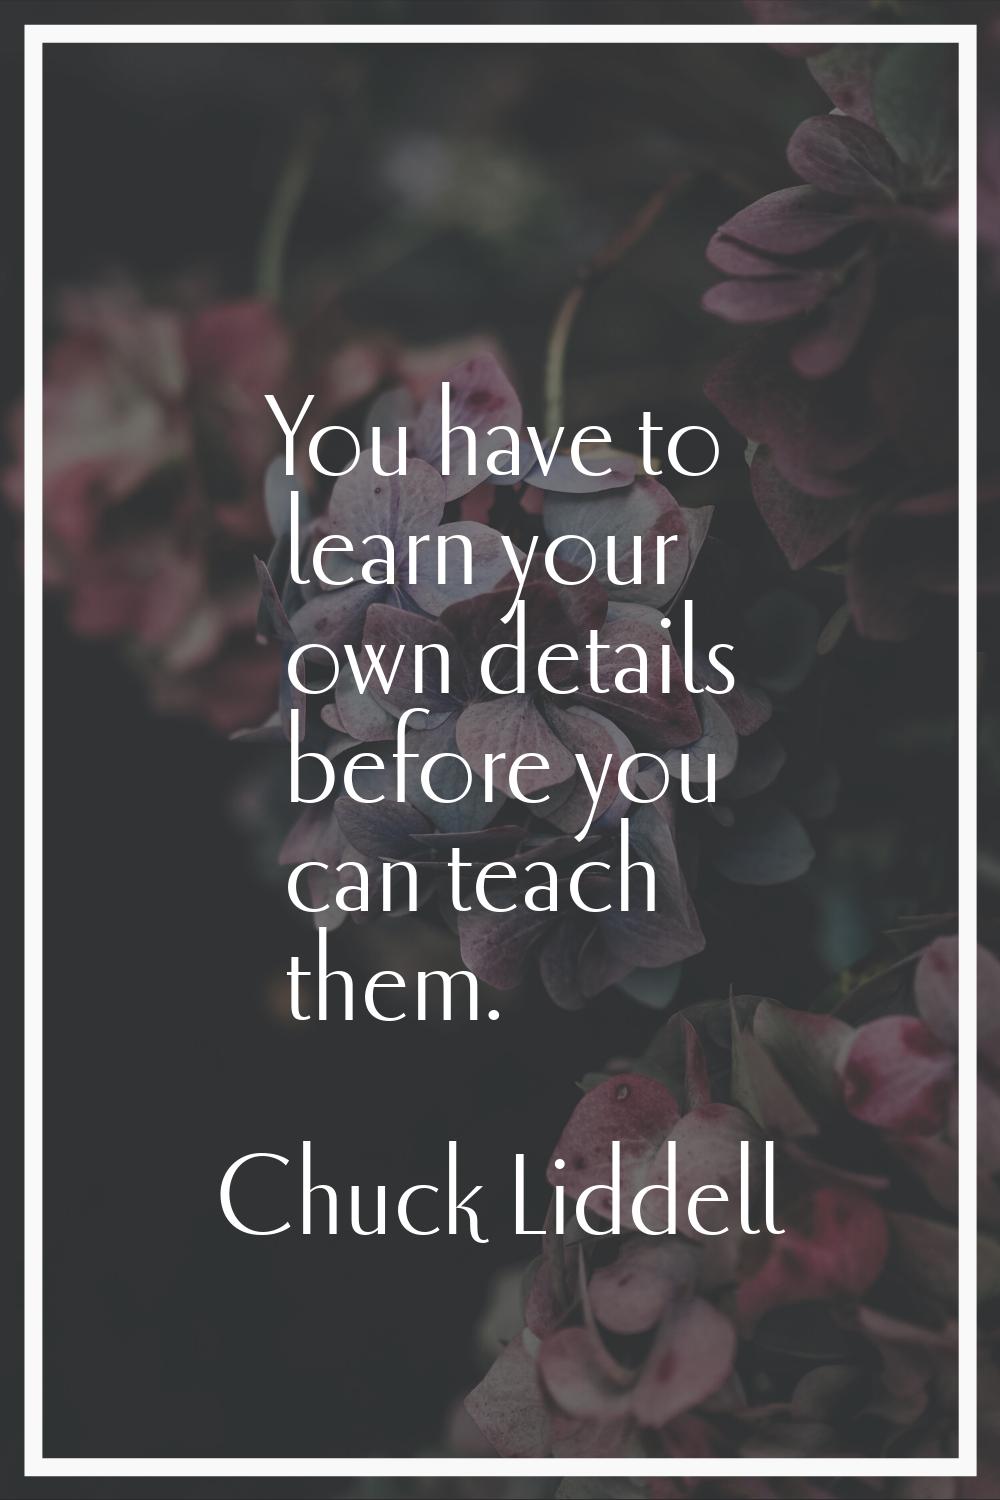 You have to learn your own details before you can teach them.